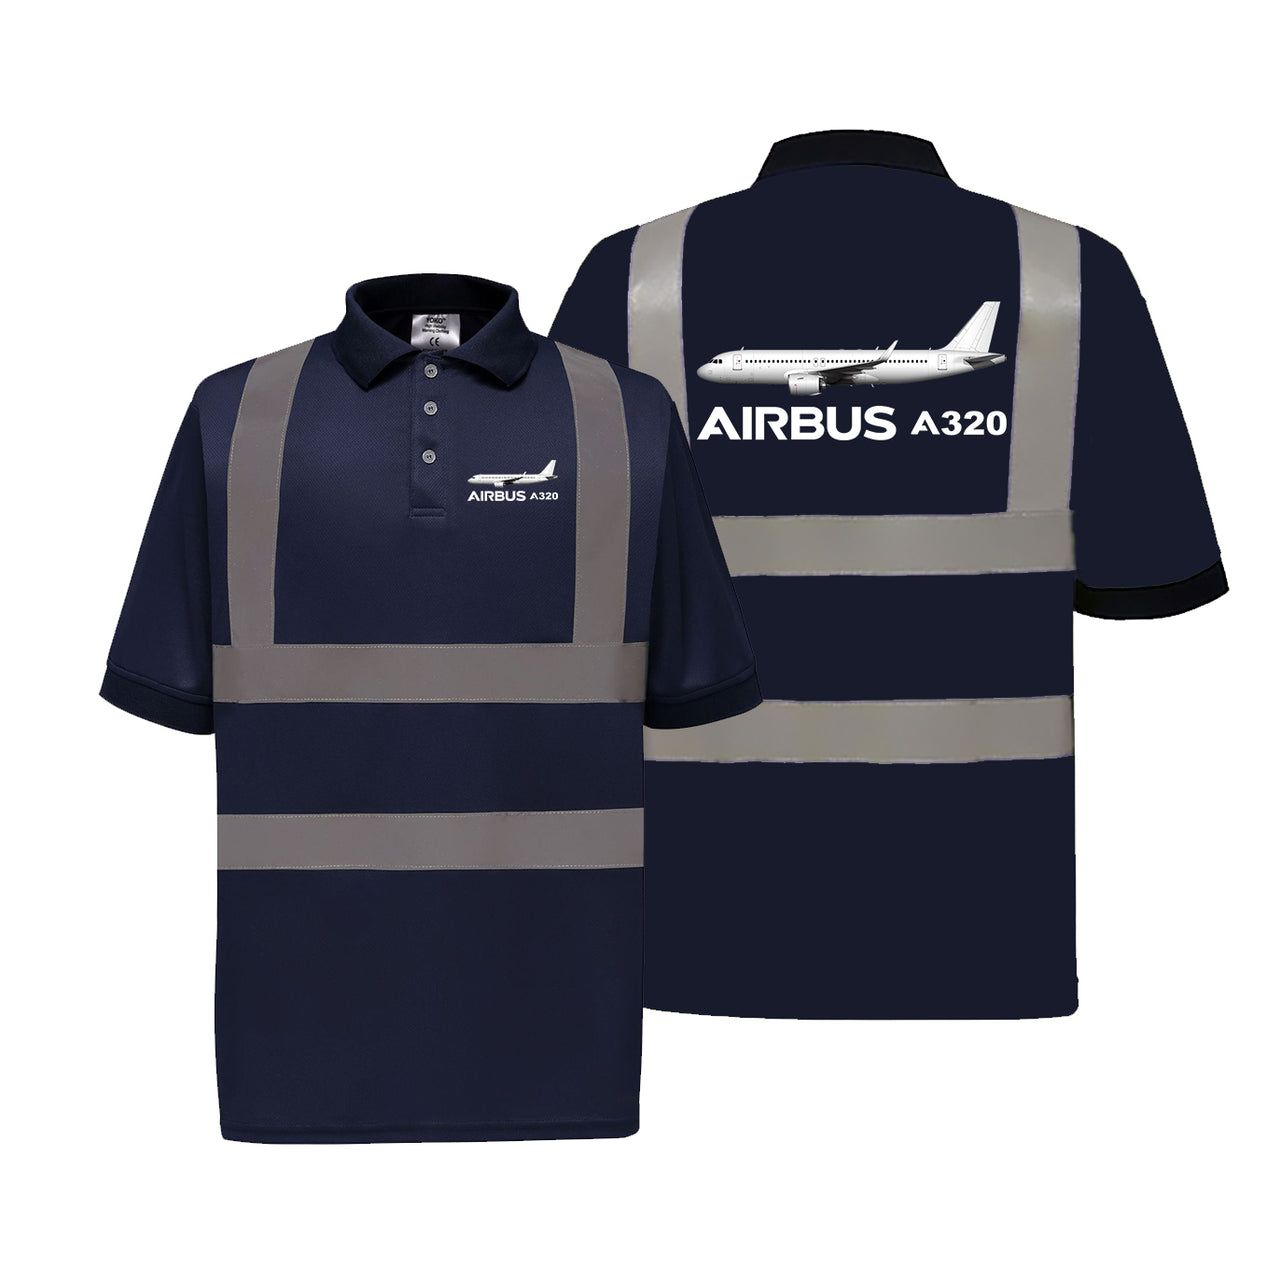 The Airbus A320 Designed Reflective Polo T-Shirts